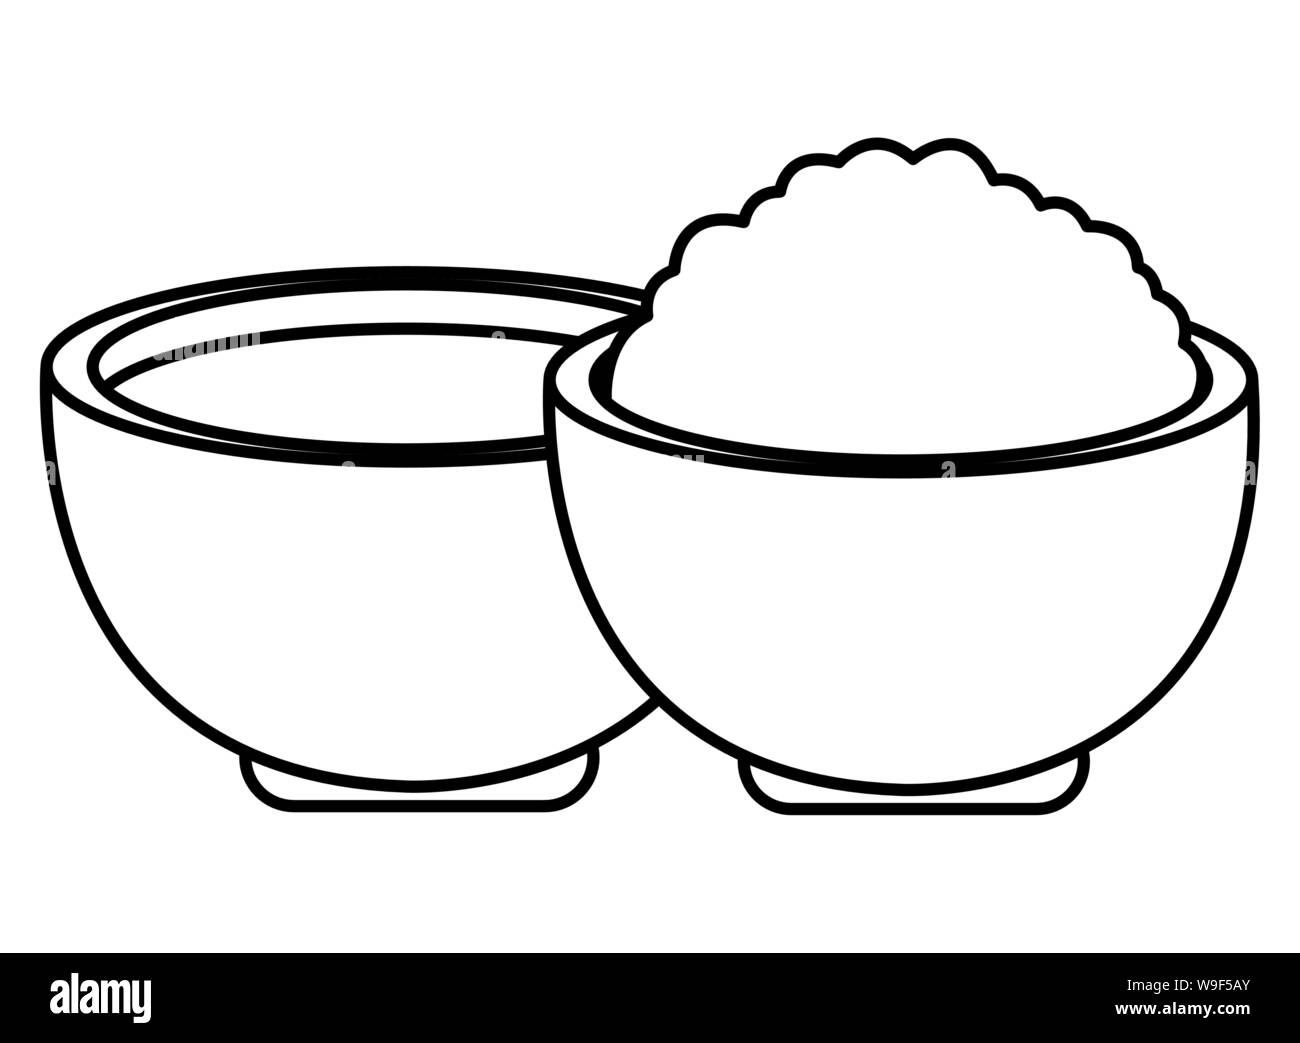 Rice and sou in bowls cartoon in black and white Stock Vector